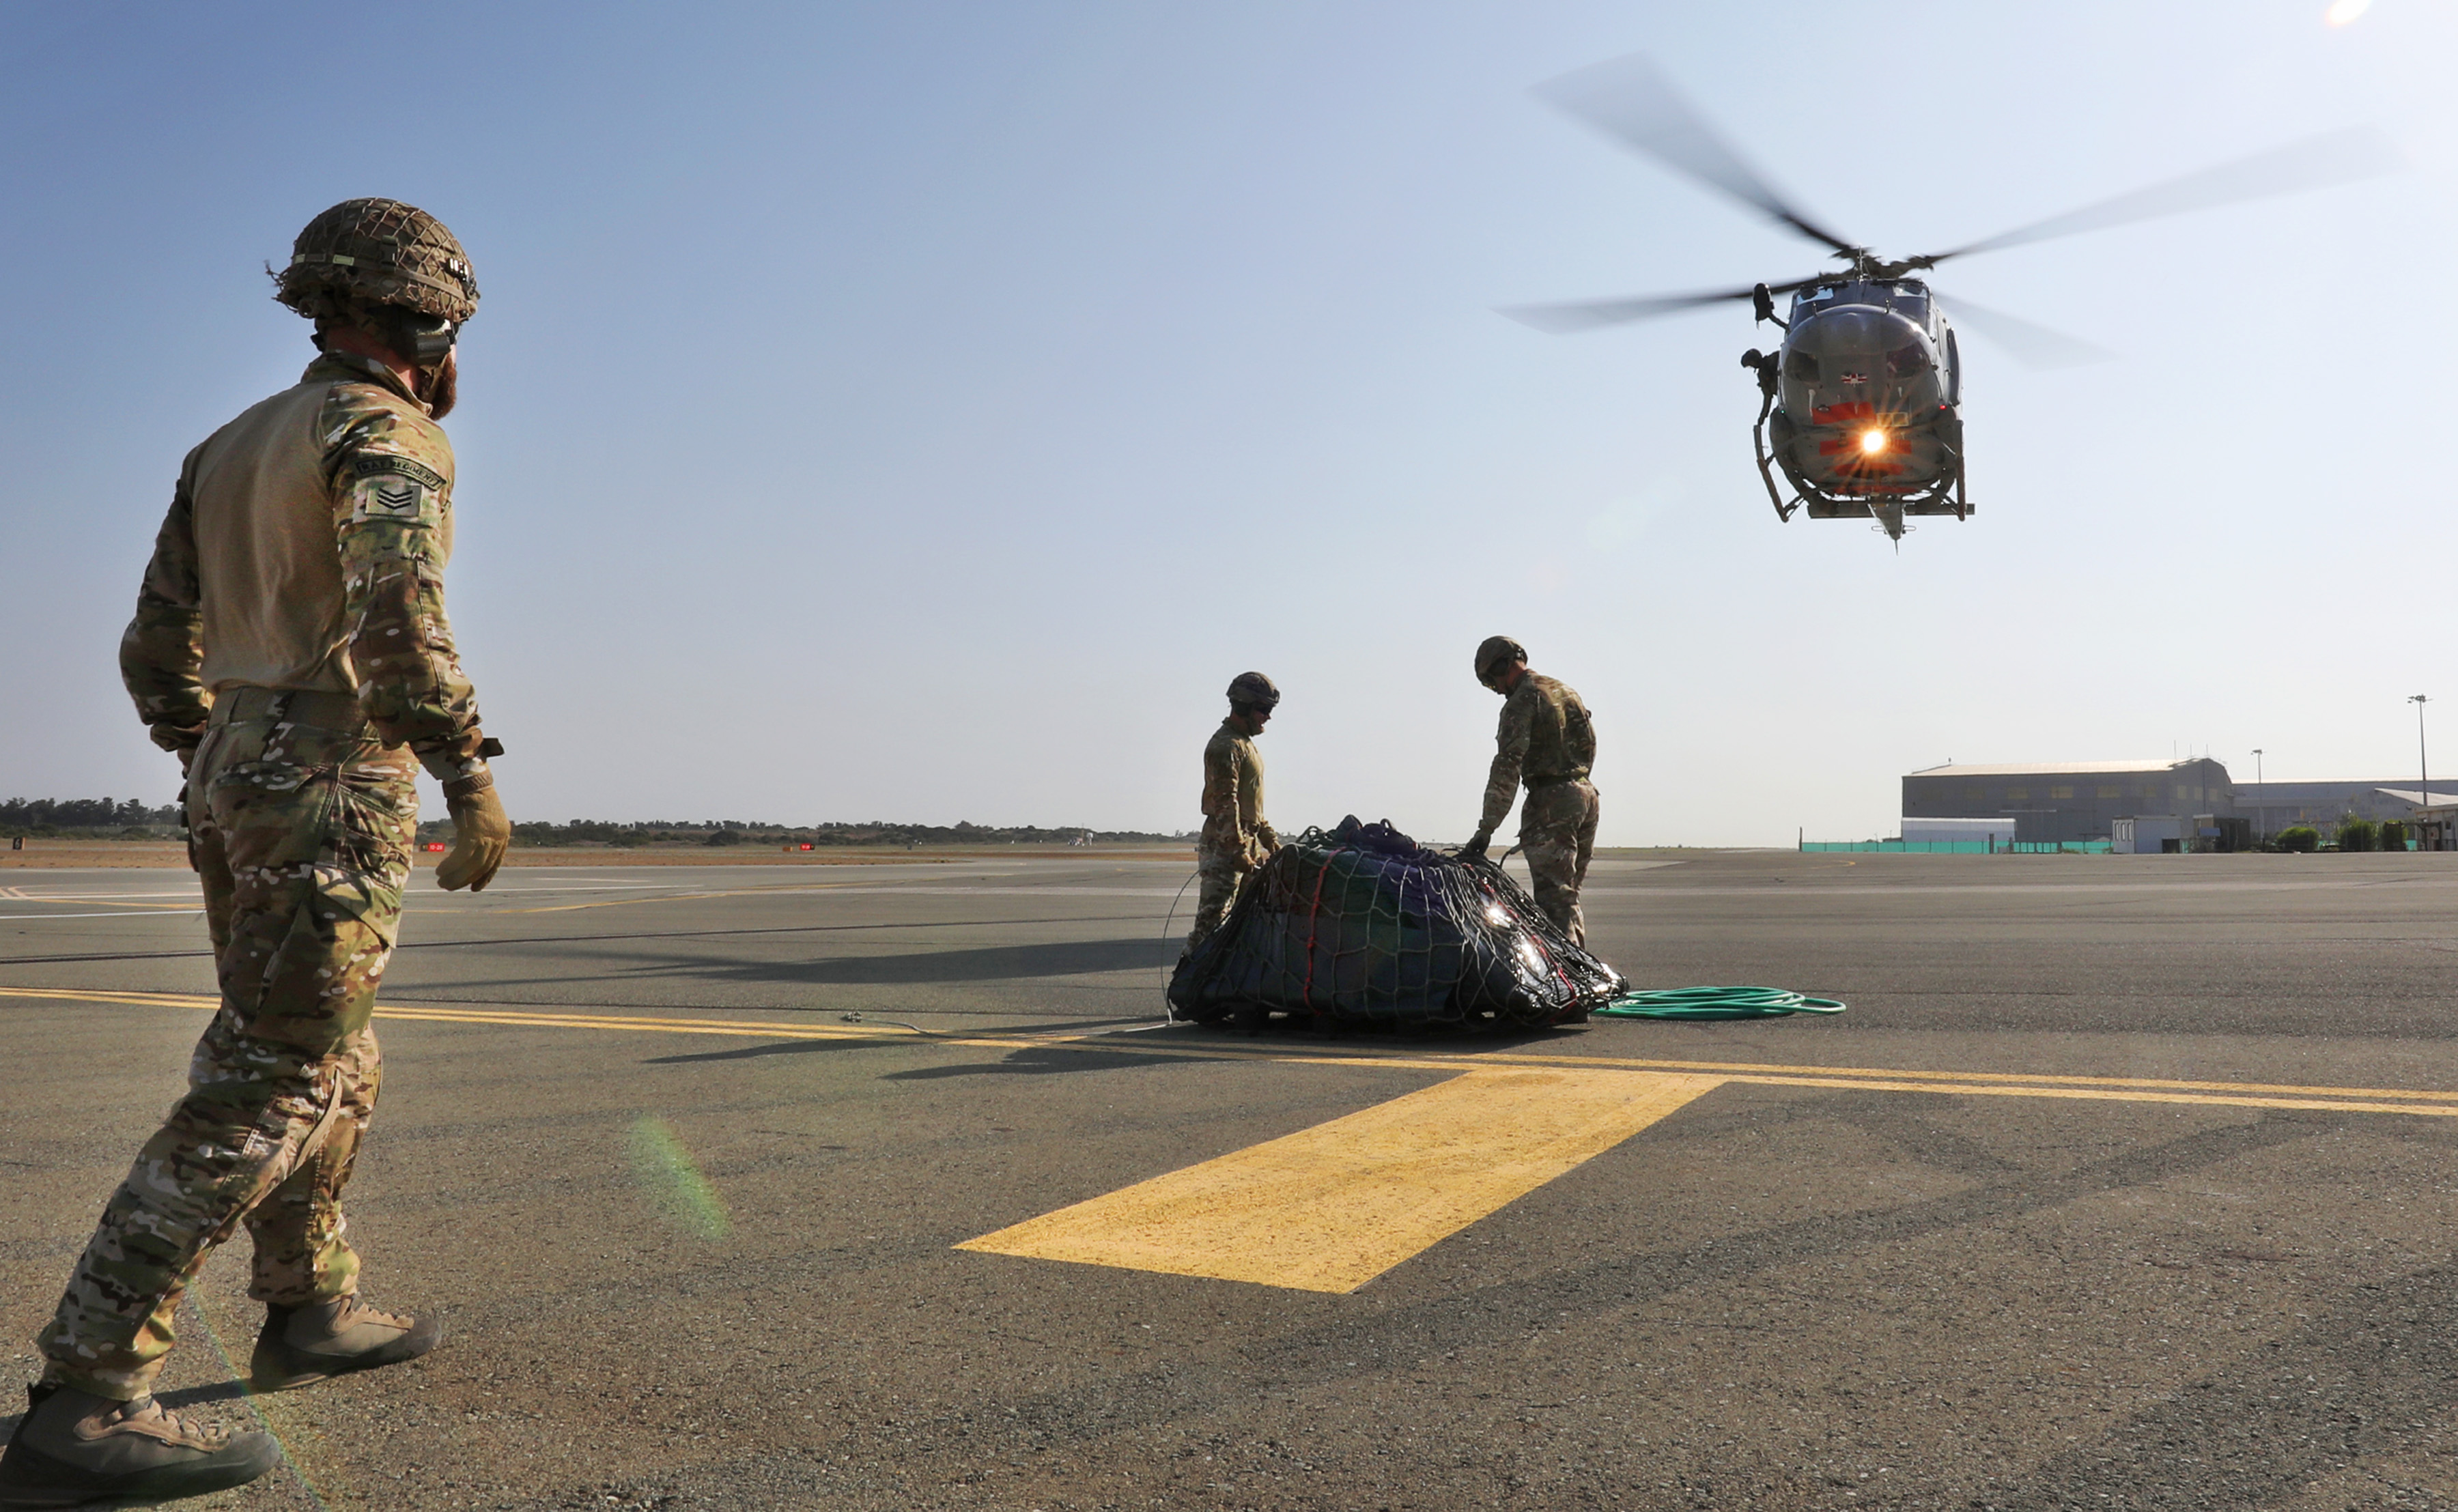 Image shows RAF aviators with cargo on an airfield, as a Chinook helicopter flies overhead.